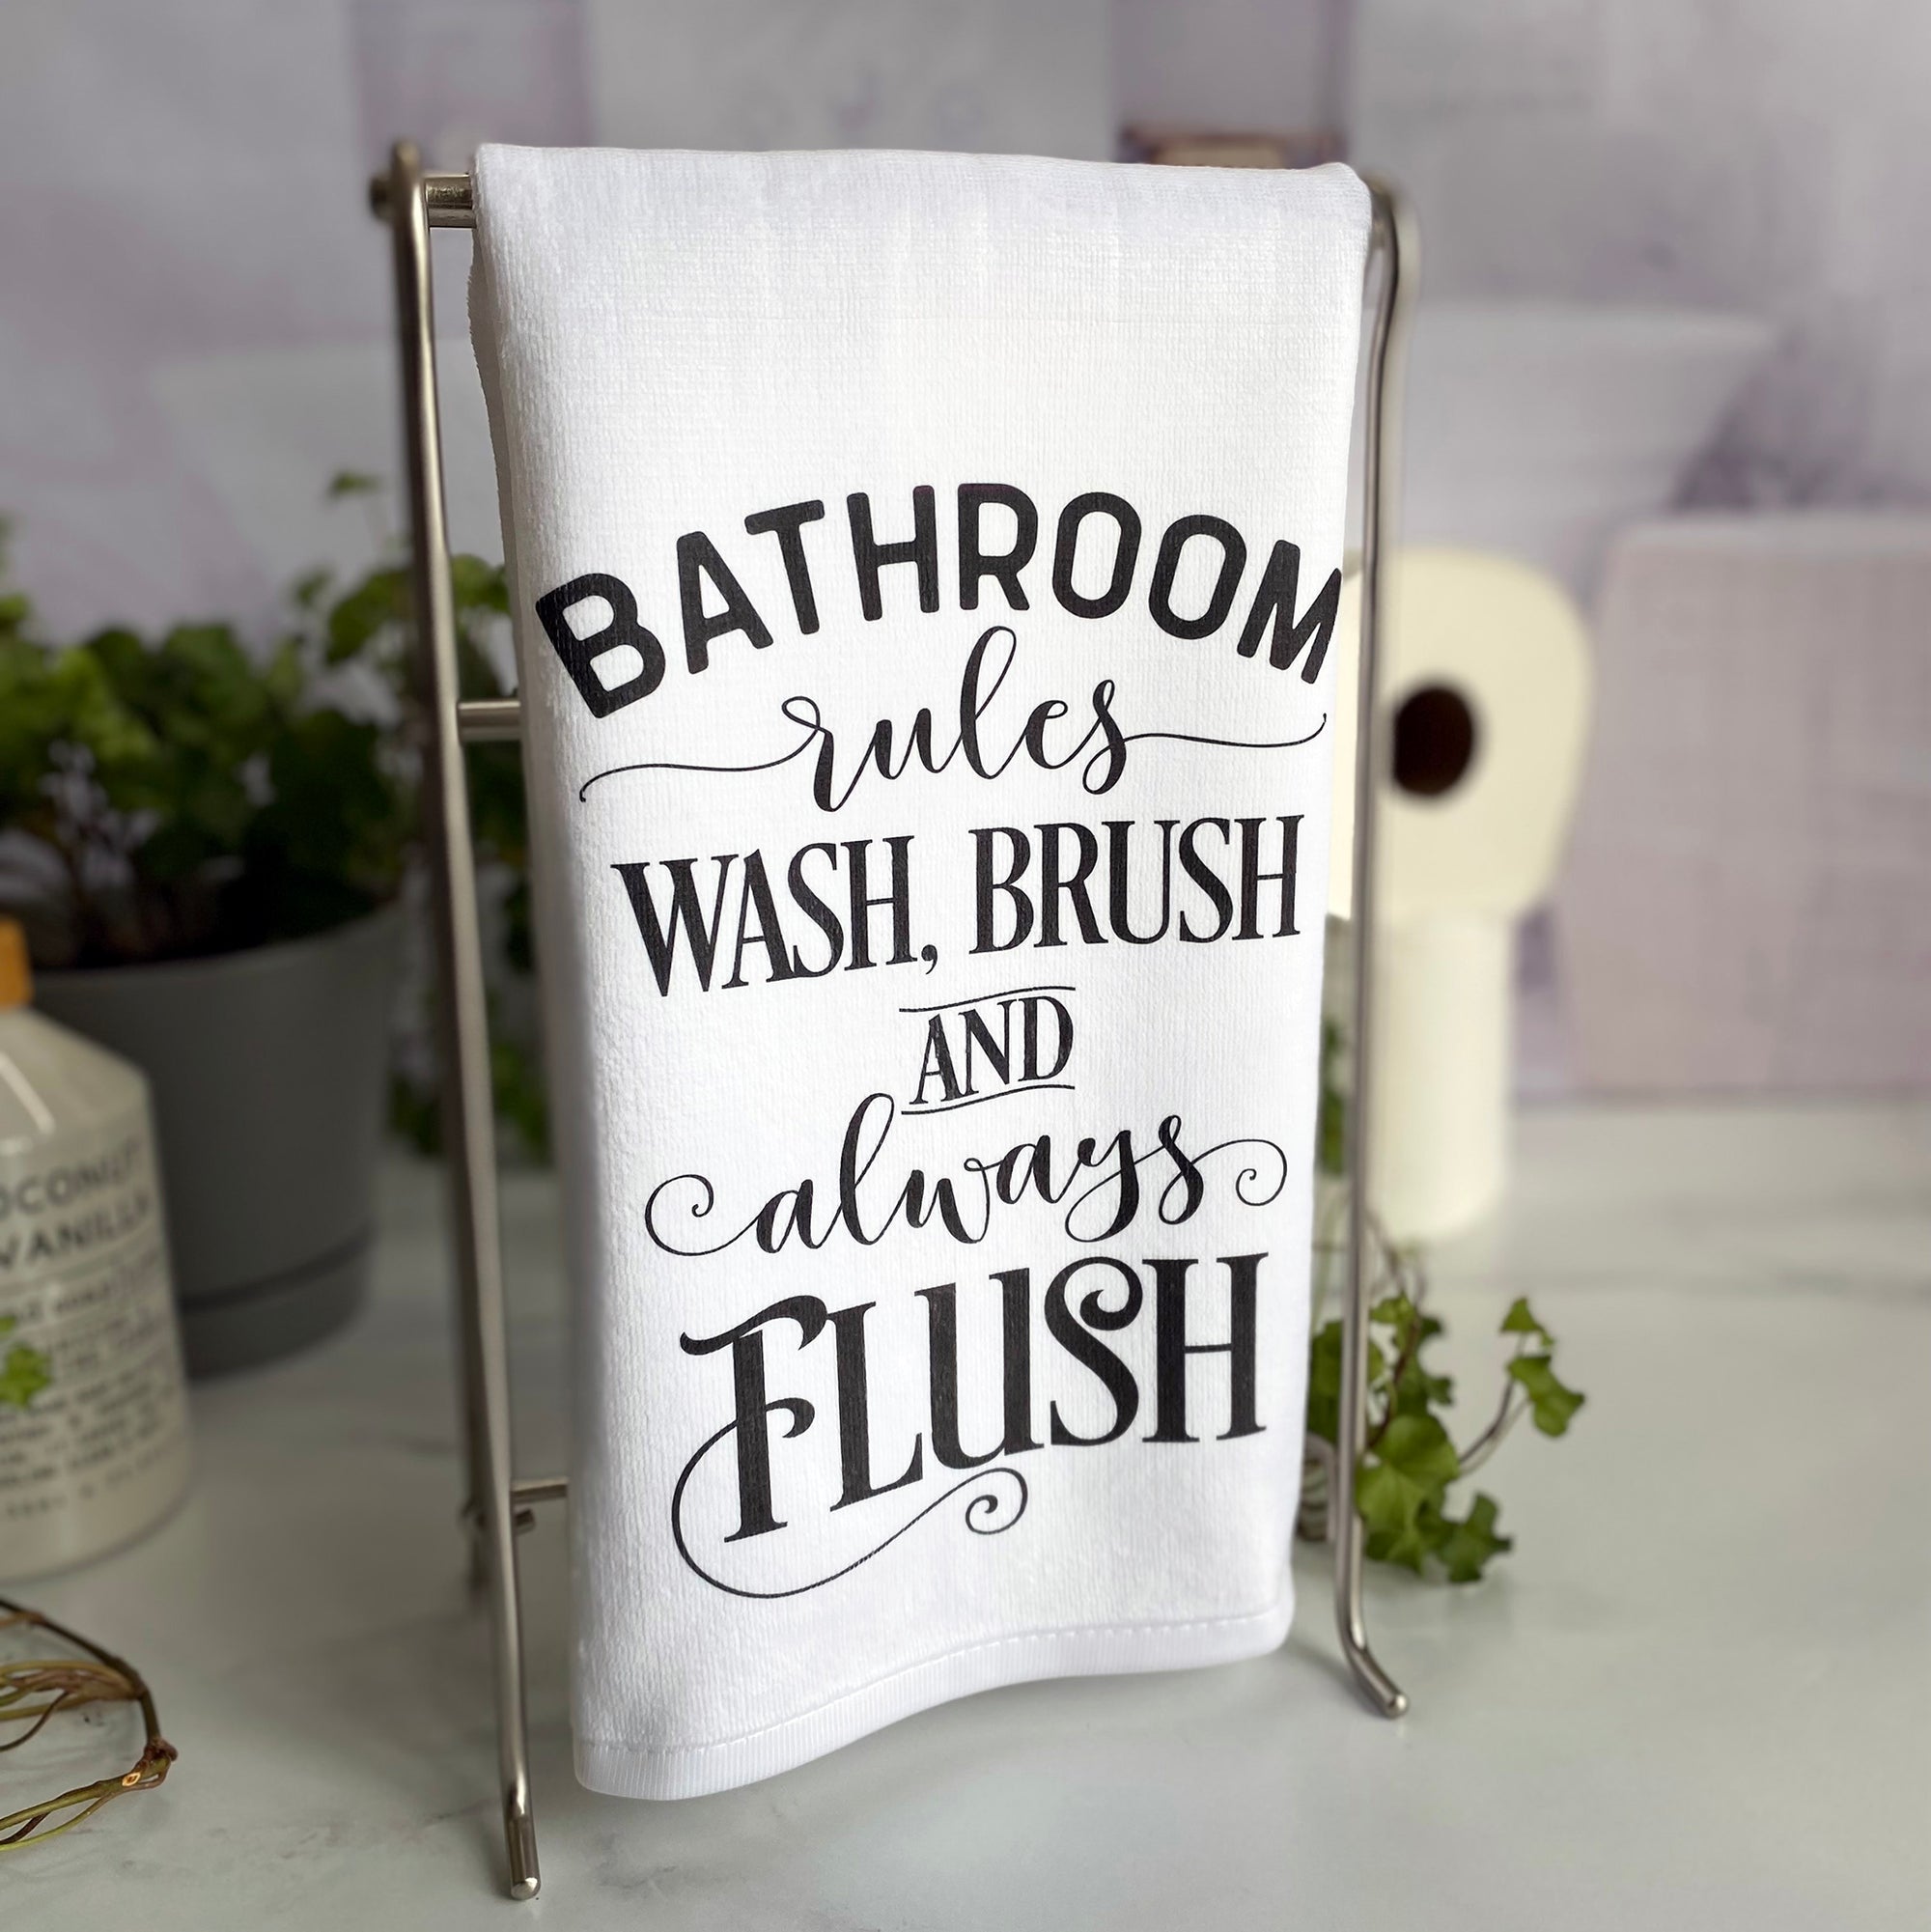 Bathroom Rules Hand Towel hanging in front of a houseplant, a stack of toilet paper rolls, and a bottle of hand soap